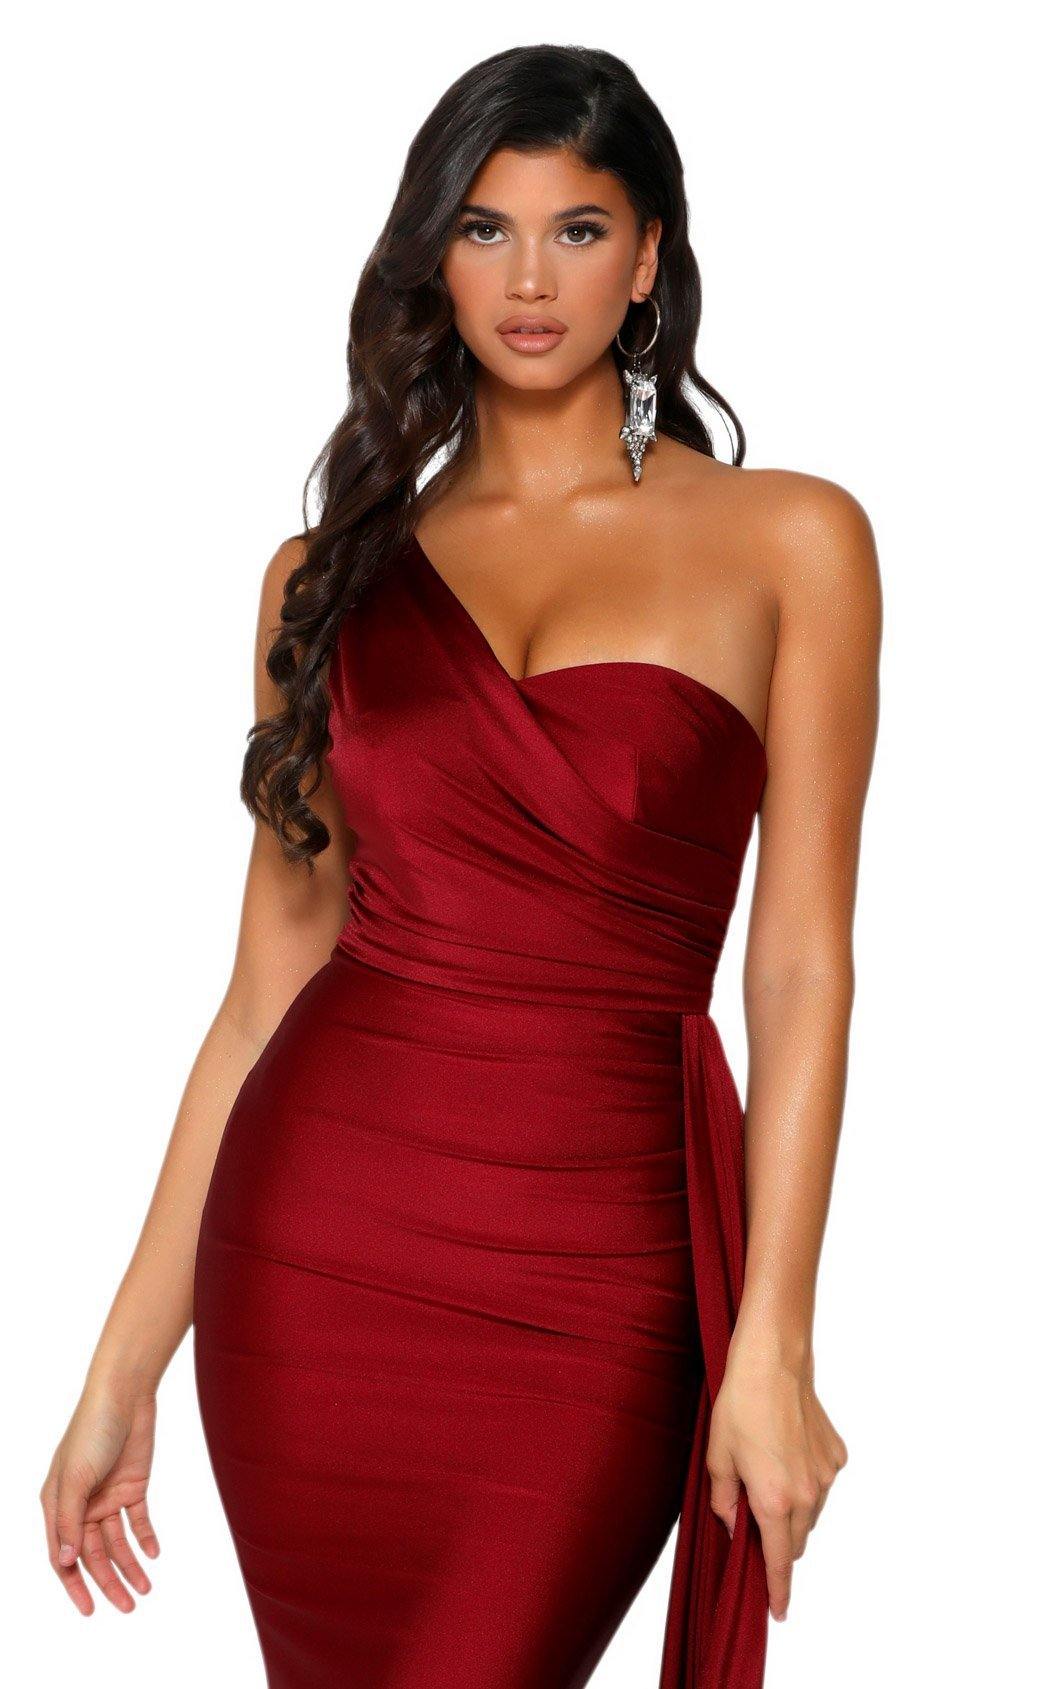 Portia and Scarlett  Long Single Shoulder Prom Dress PS6321 - The Dress Outlet